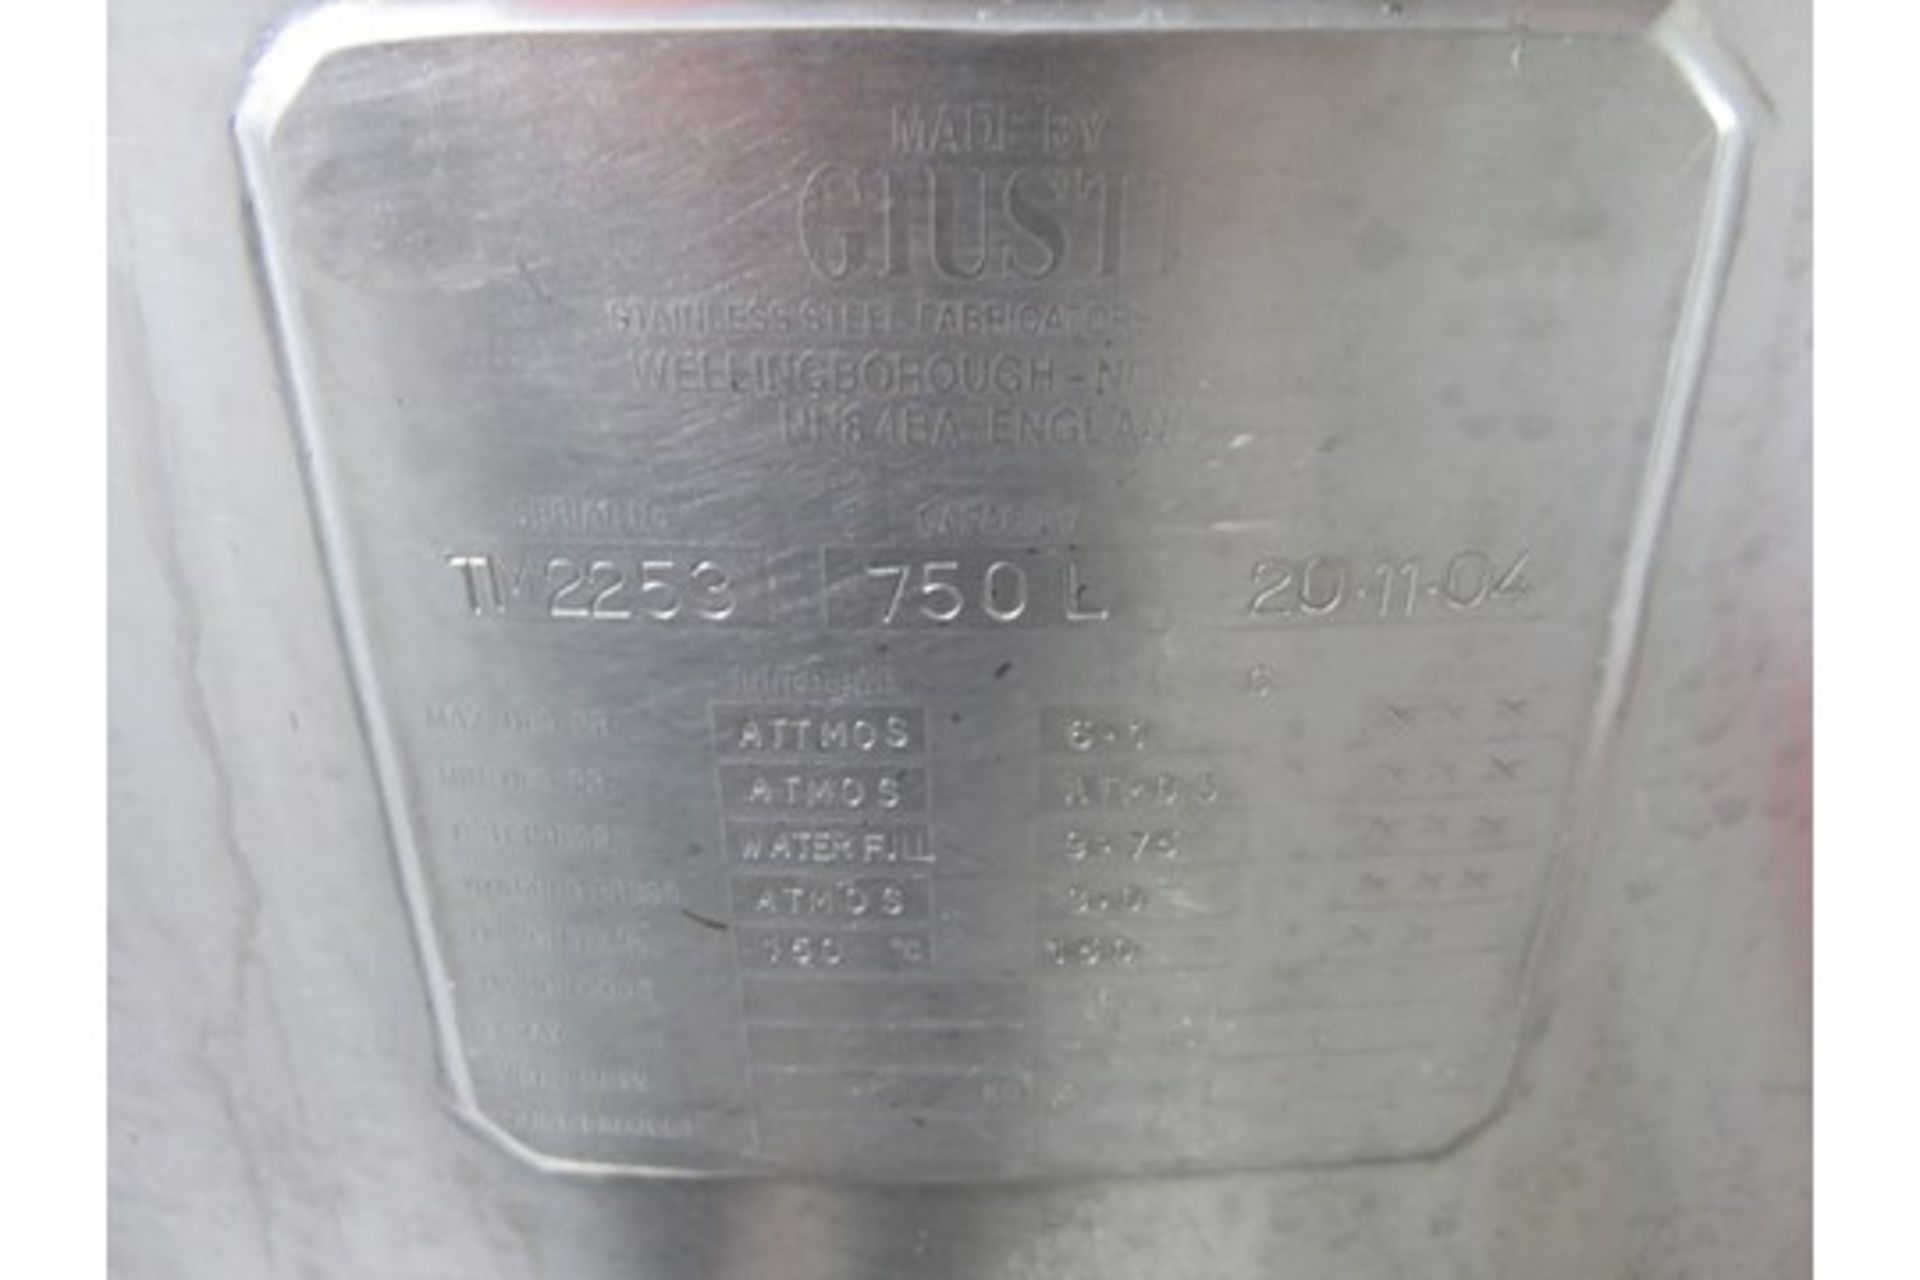 Guisti 750 litre S/s Jacketed Vessel. Steam heated. Side wall scrape rotation. Lift out £240 - Image 6 of 7